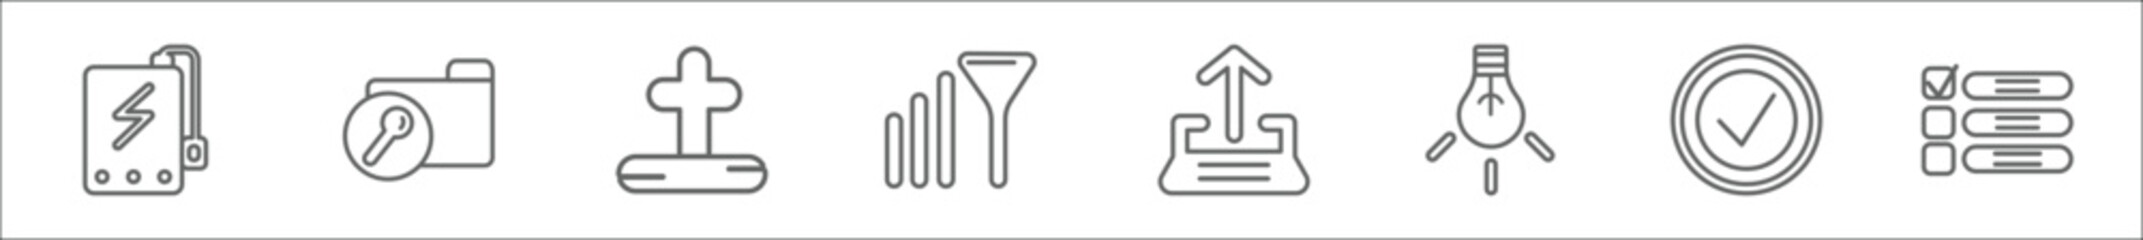 outline set of user interface line icons. linear vector icons such as power bank, search in folder, cross, connection, uploading from drive, tungsten, tick mark, list layout with check boxes